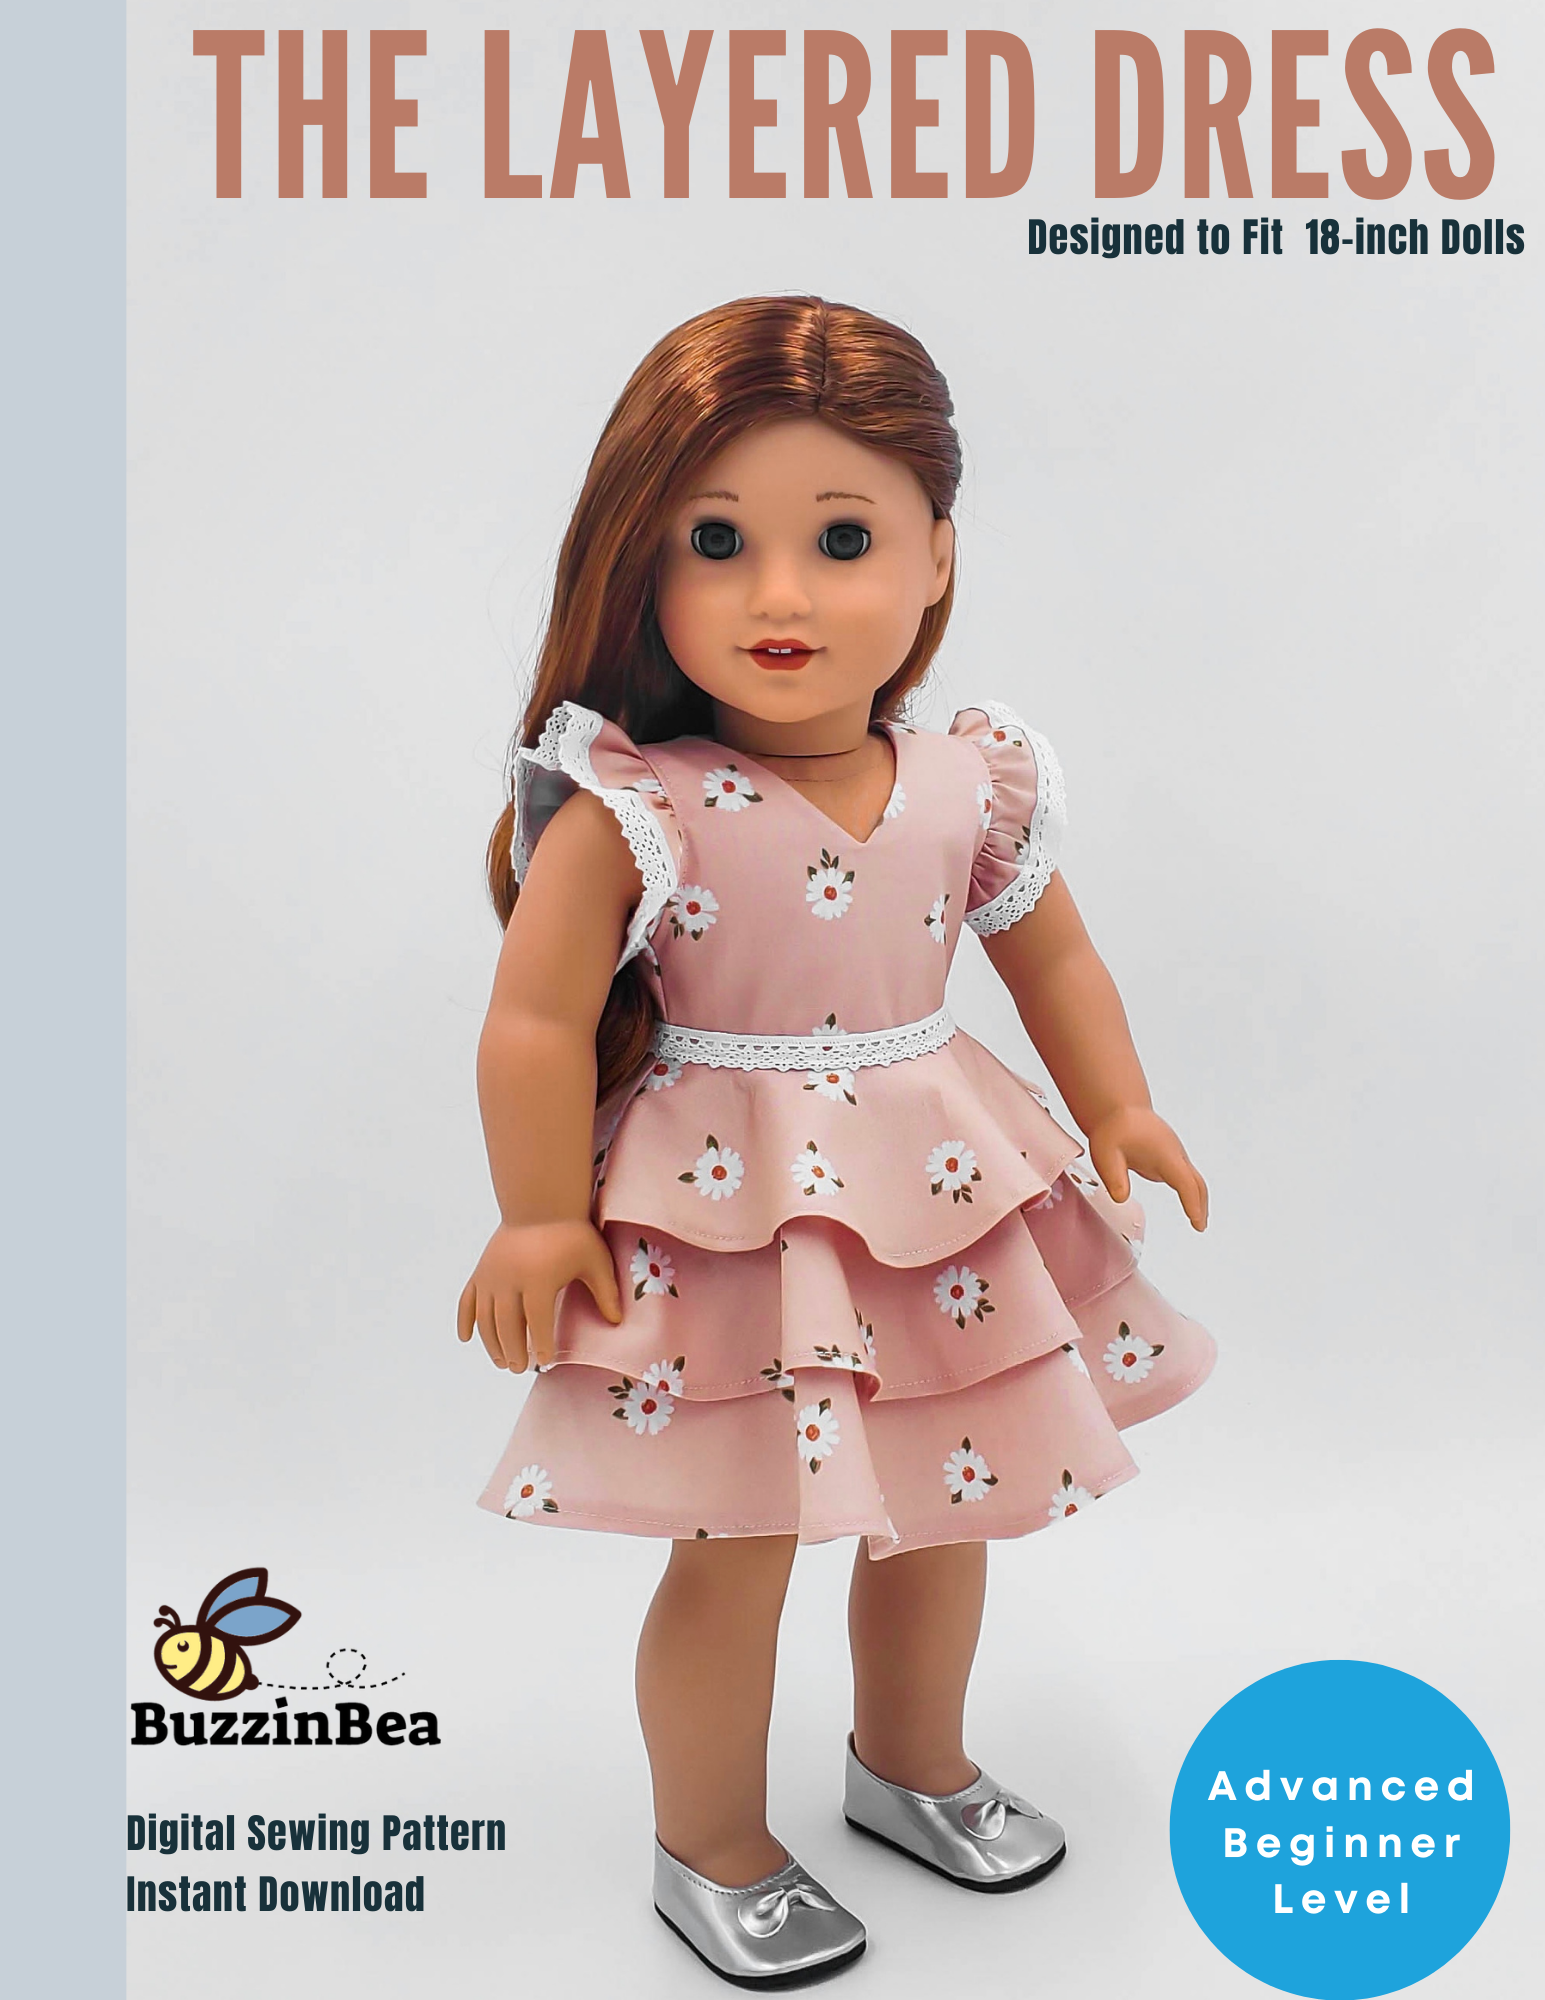 American Girl Dress Pattern  American girl dress pattern, American girl  doll clothes patterns, 18 inch doll clothes pattern